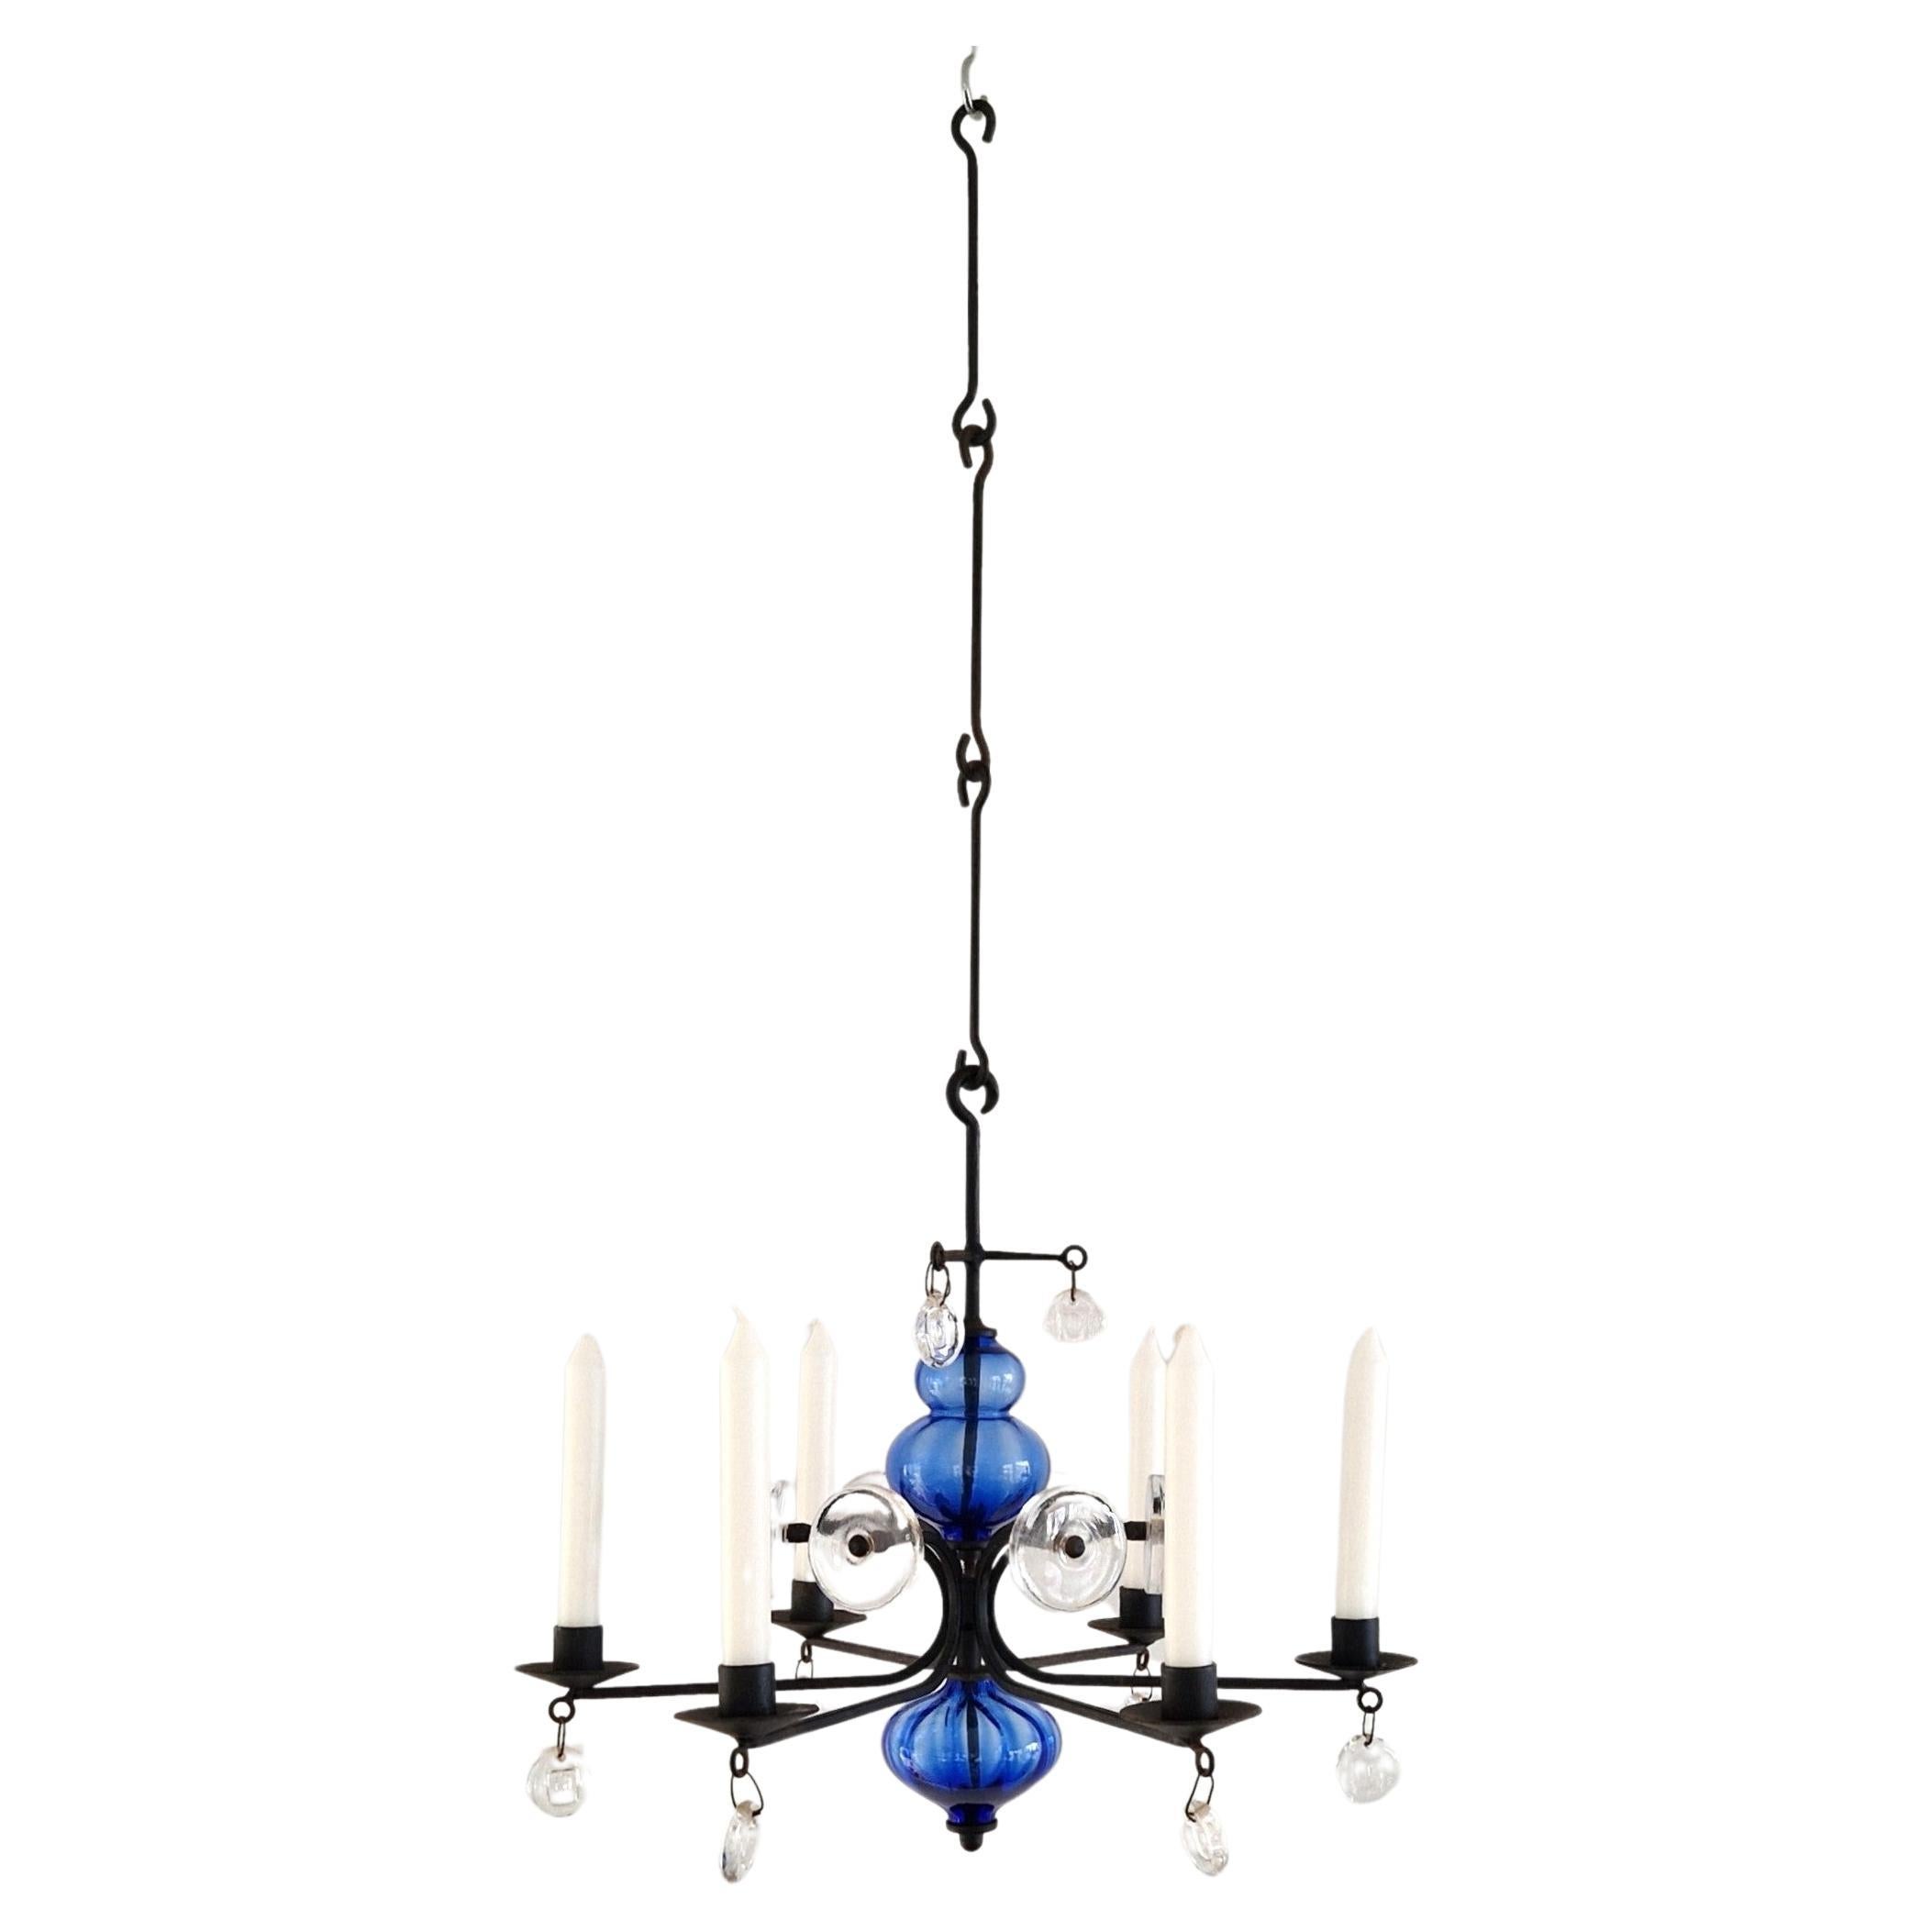 Art glass and wrought iron chandelier by Erik Höglund for Boda, Sweden For Sale